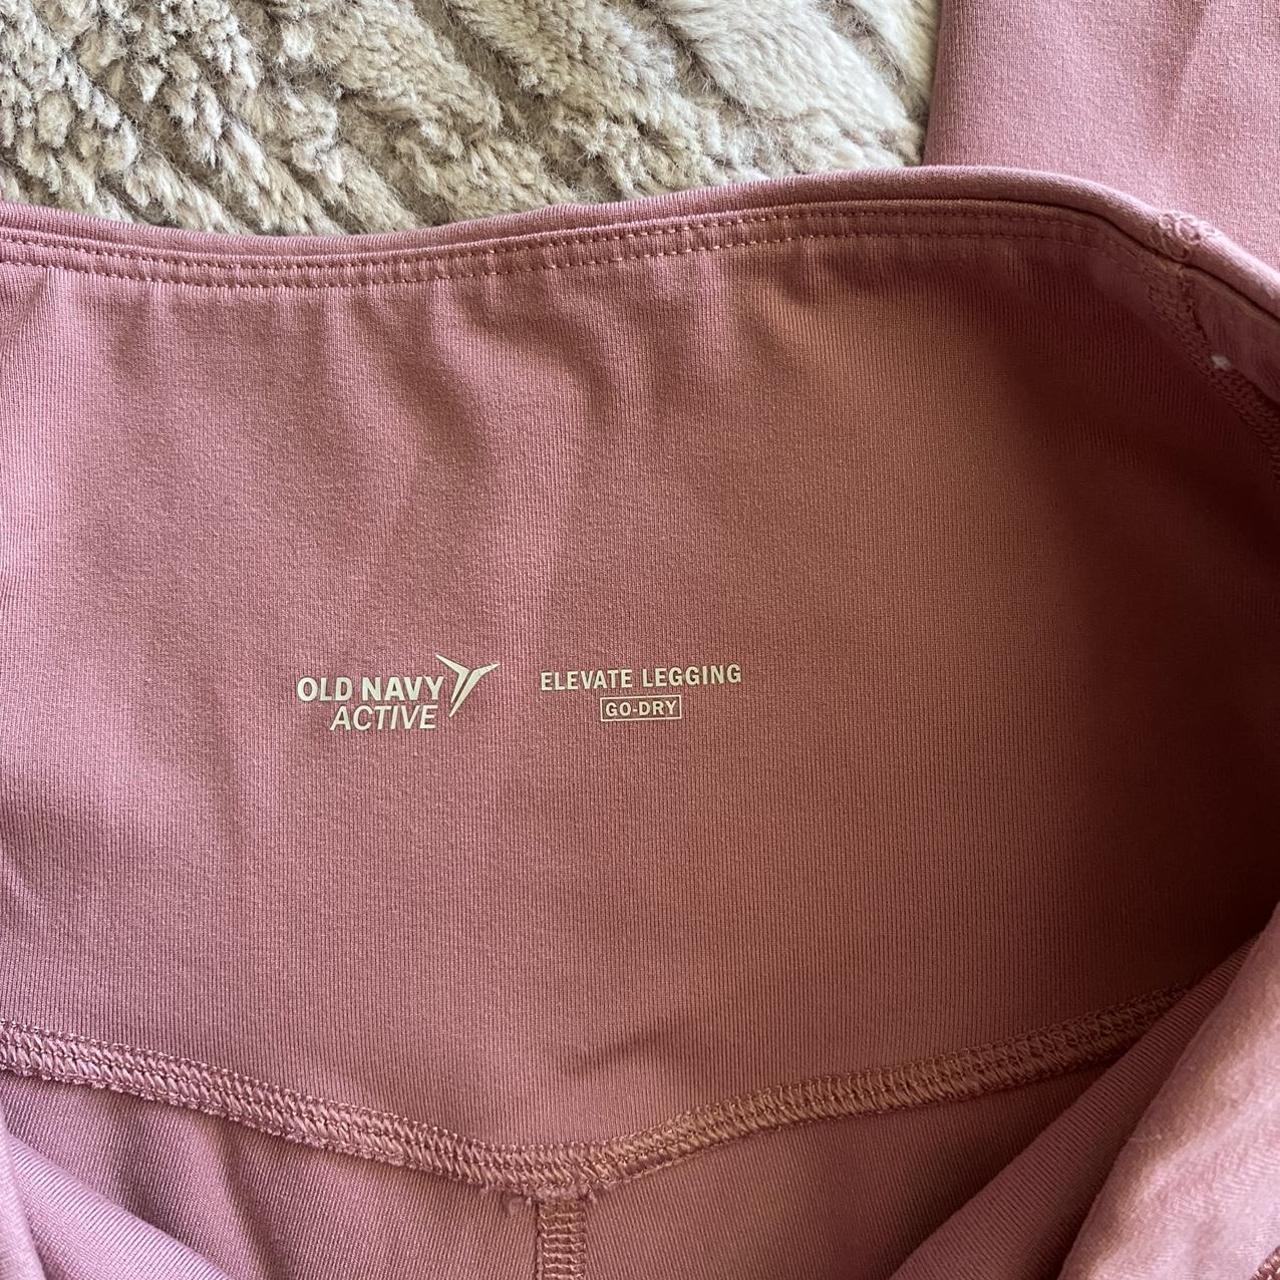 Old navy elevate leggings go dry color pink and - Depop